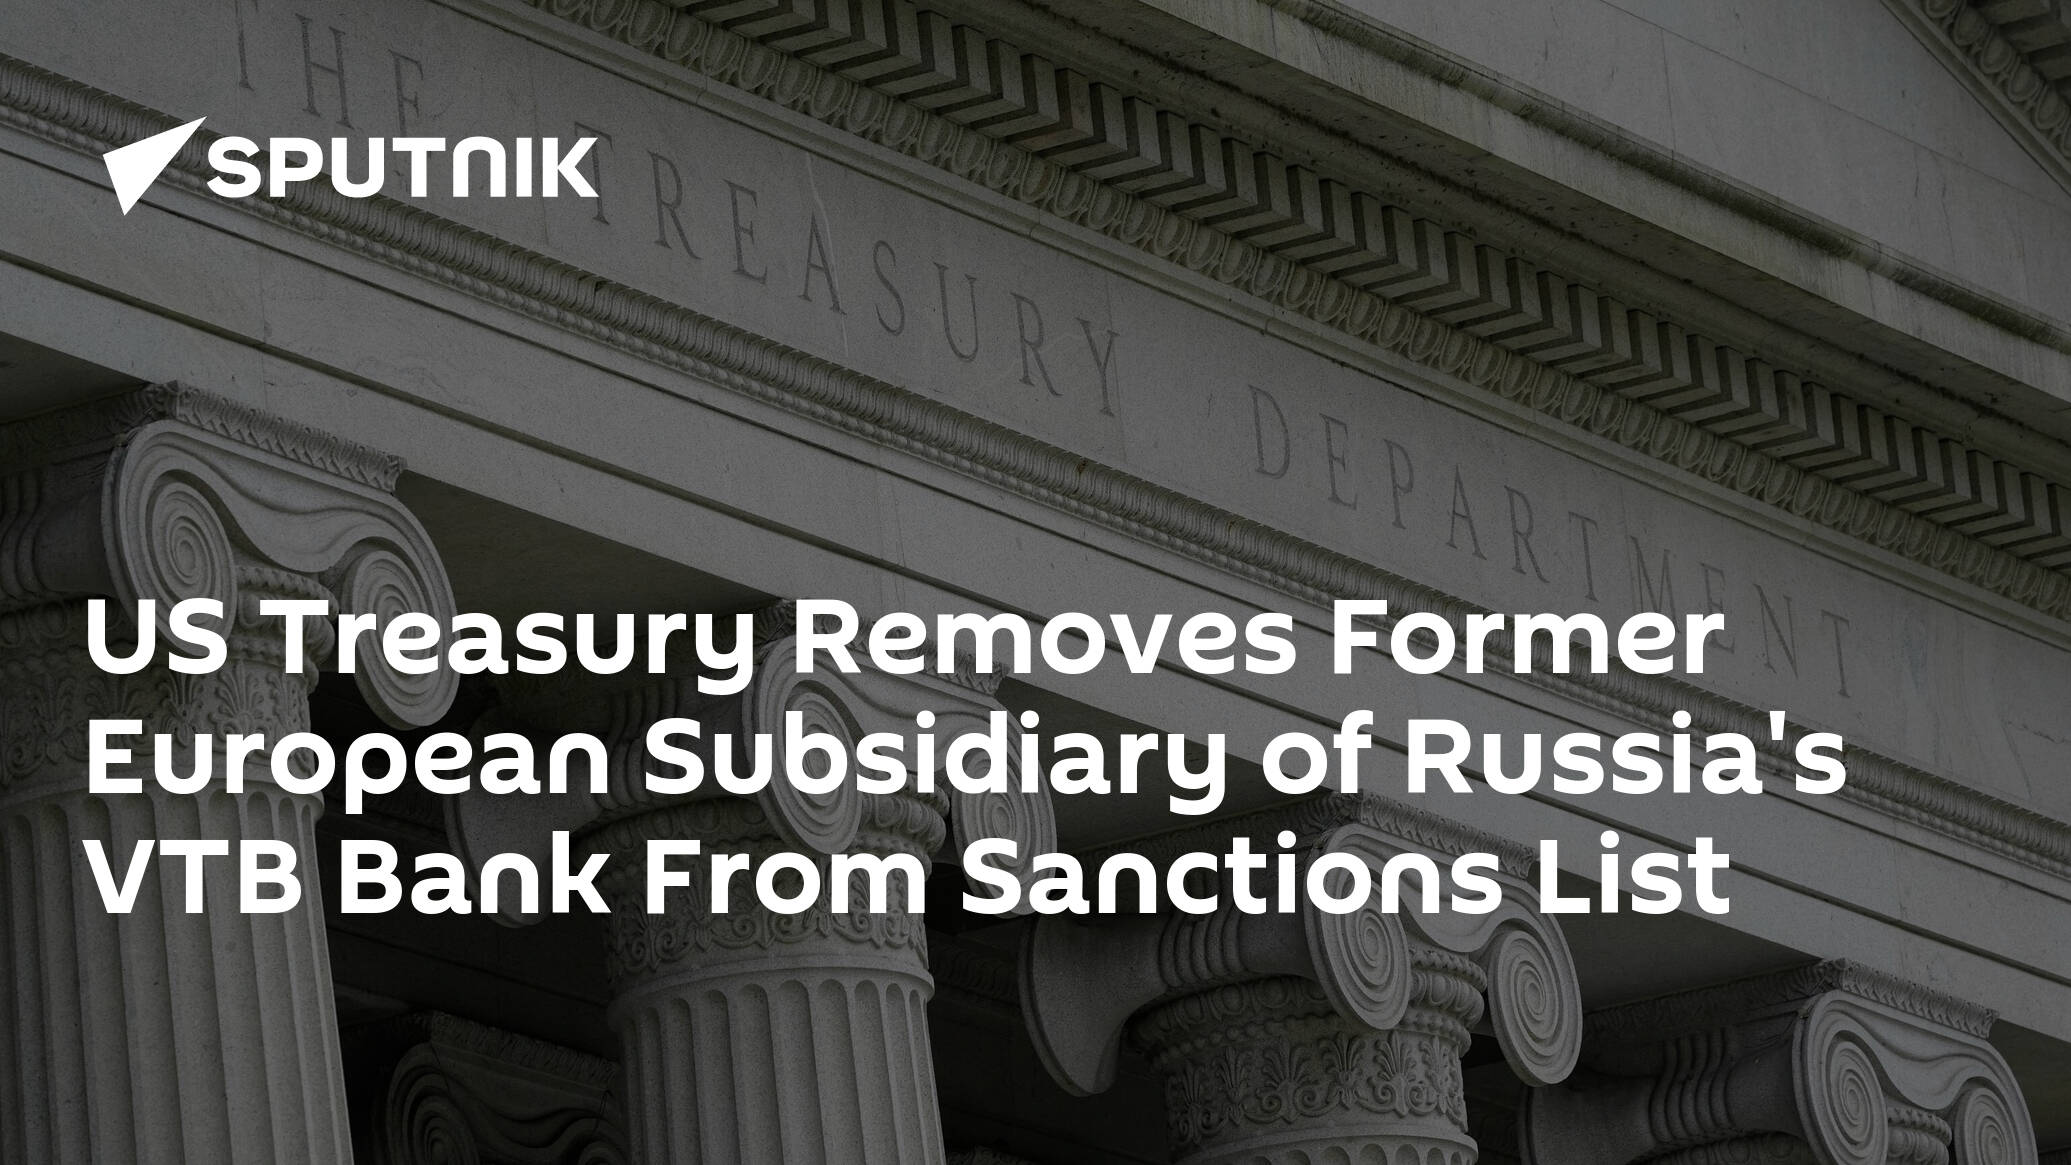 US Treasury Removes Former European Subsidiary of Russia's VTB Bank From Sanctions List